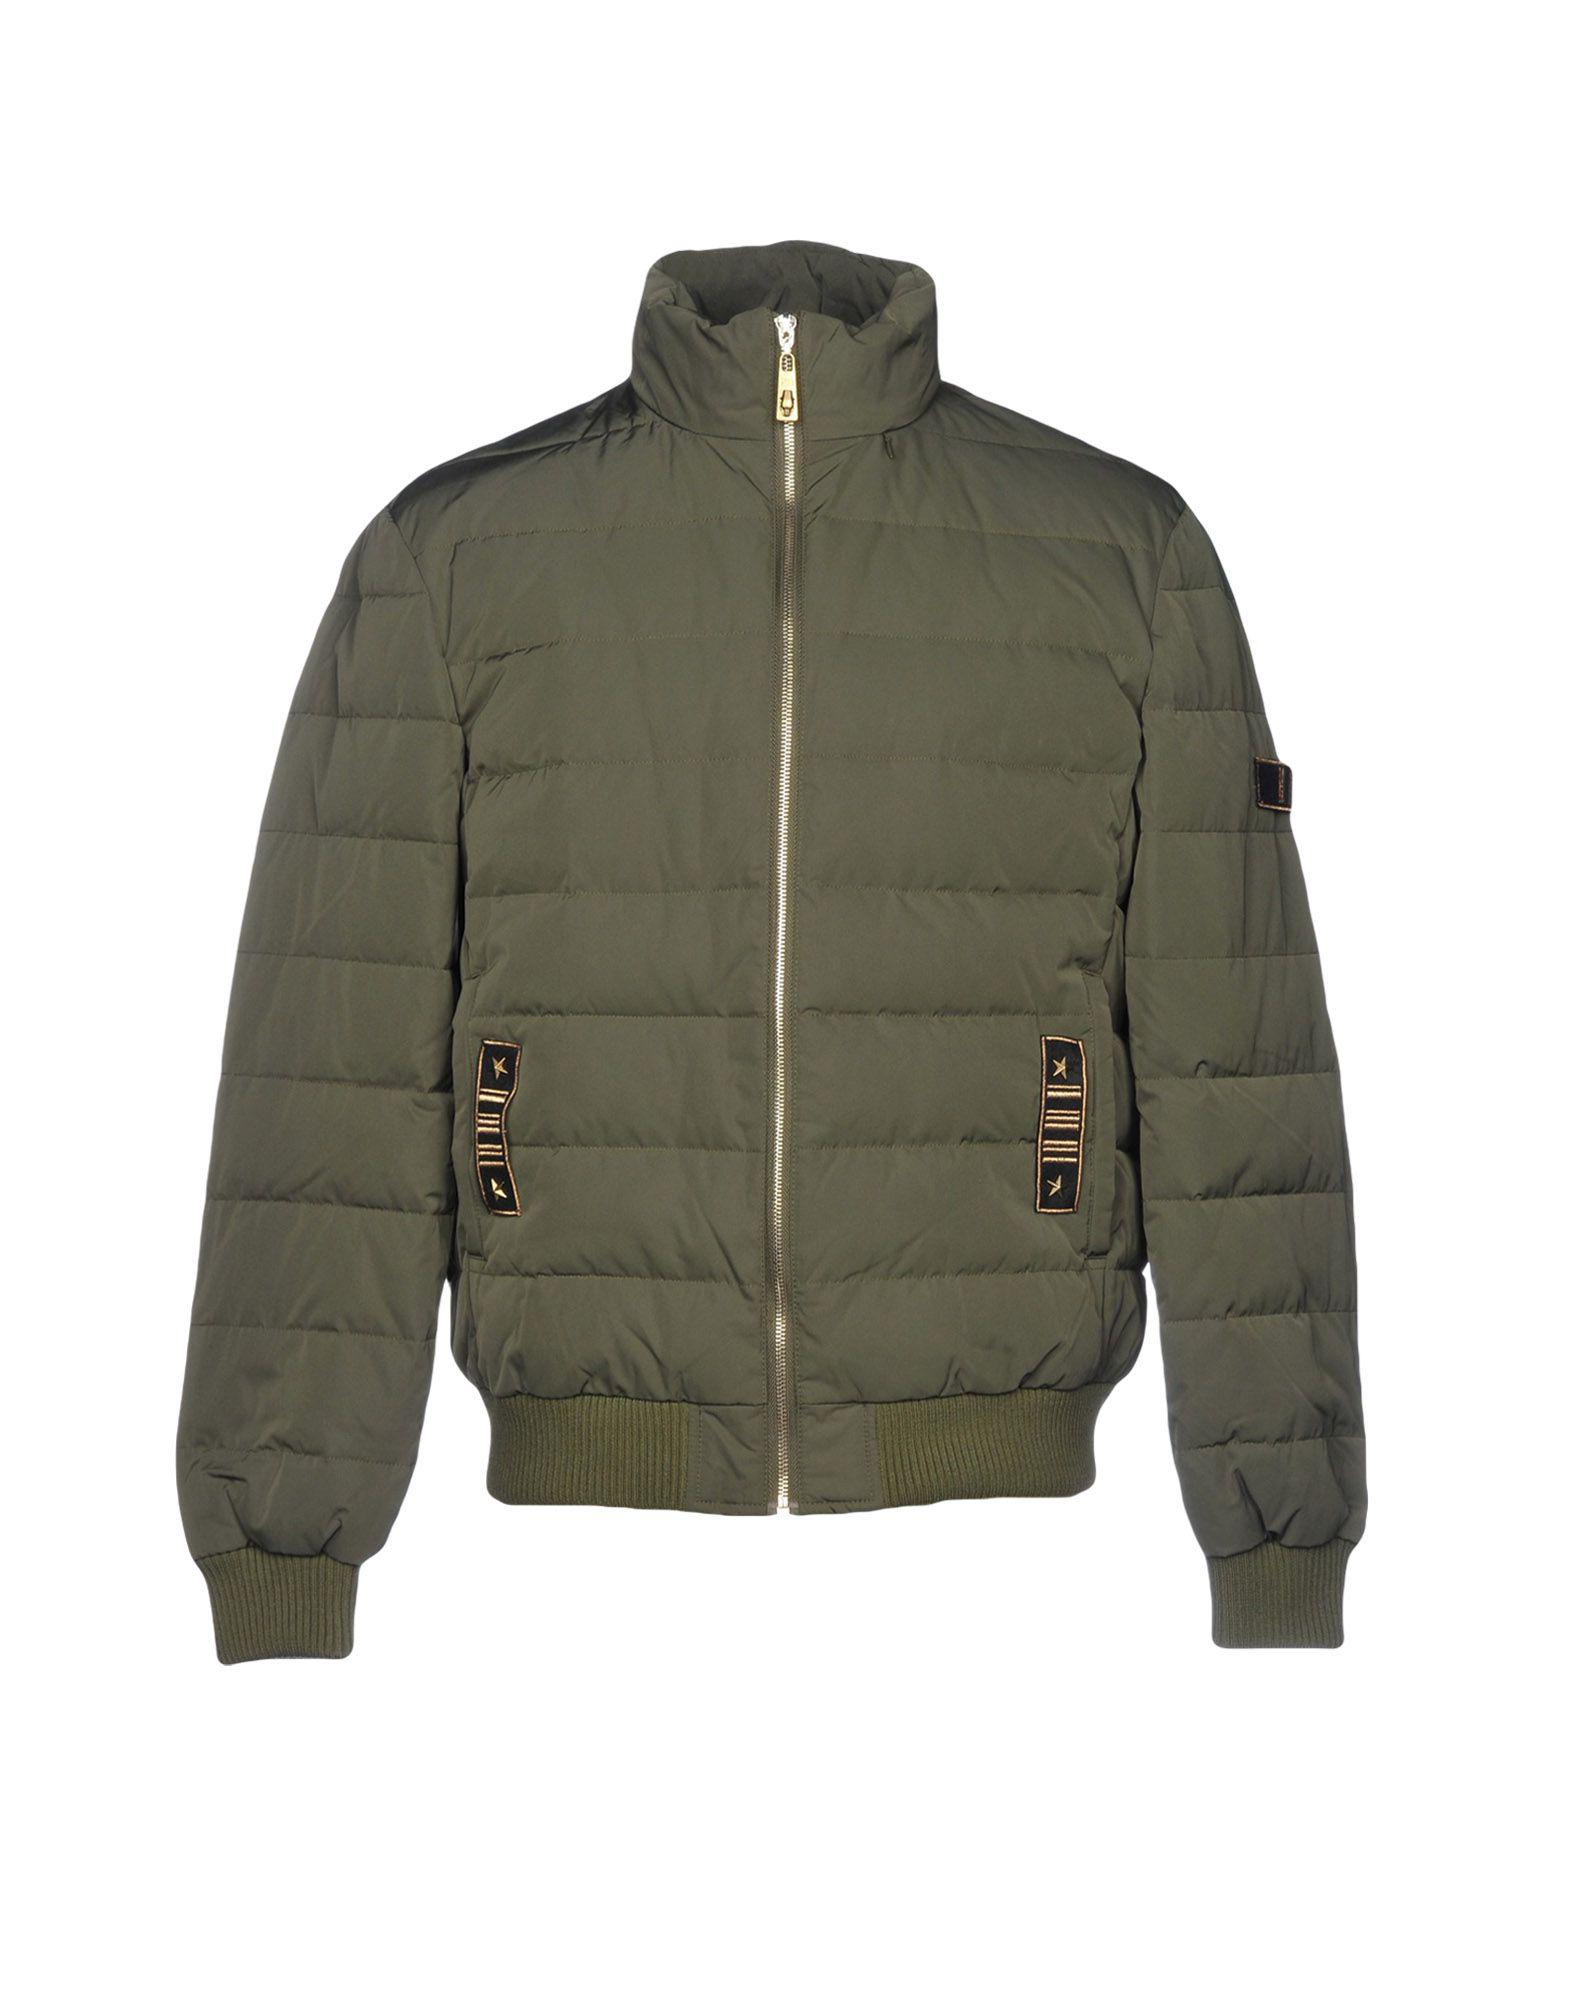 Class Roberto Cavalli Goose Down Jacket in Military Green (Green) for Men -  Lyst